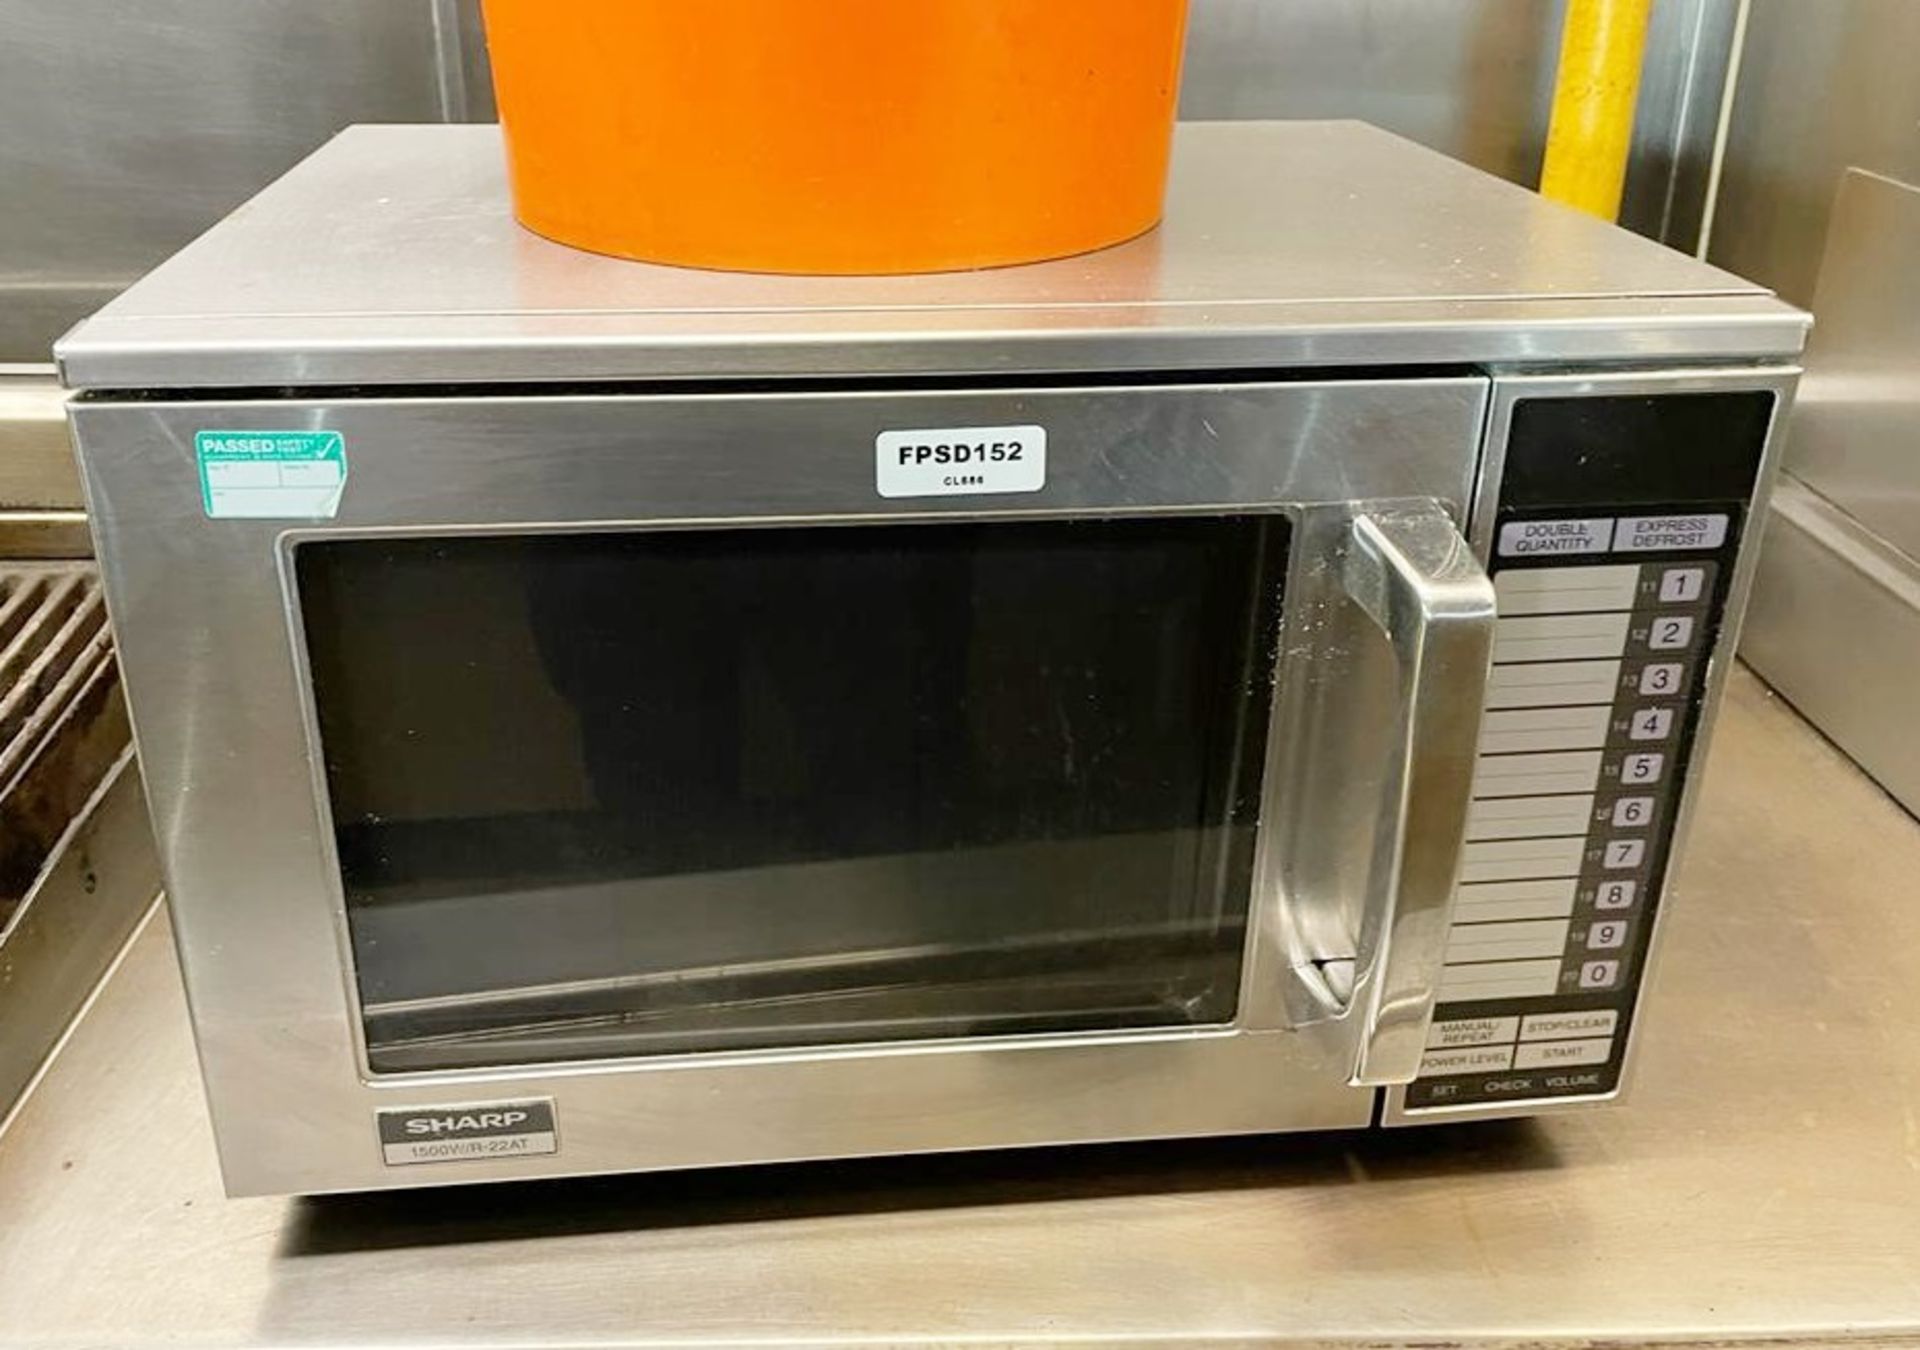 1 x SHARP Heavy Duty Commercial Microwave - Model: 1500W/R-22AT - 28-litre - Dimensions: H33.5 x W51